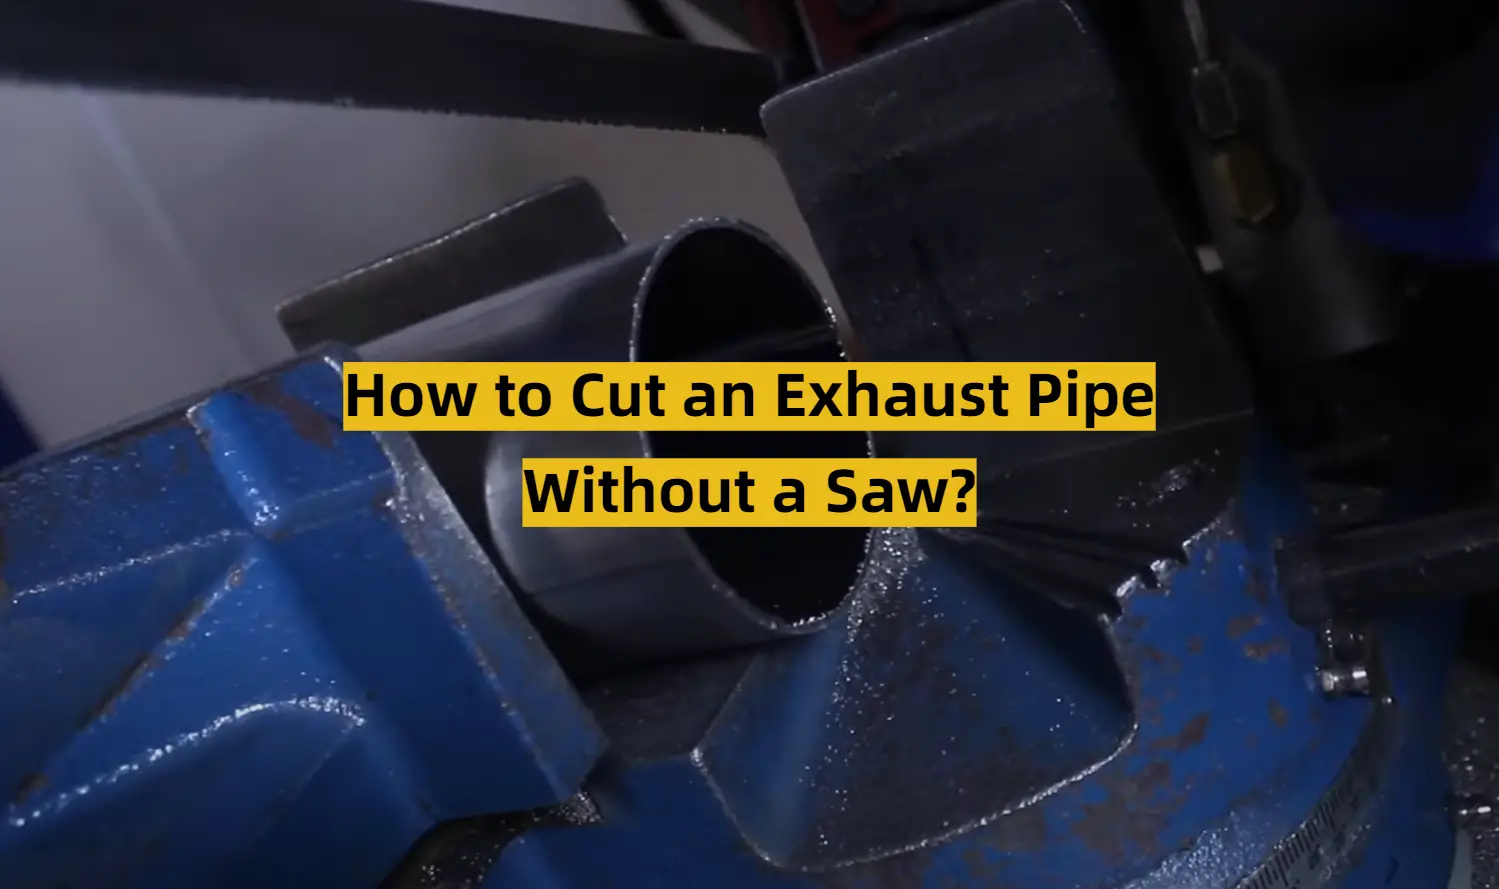 How to Cut an Exhaust Pipe Without a Saw?